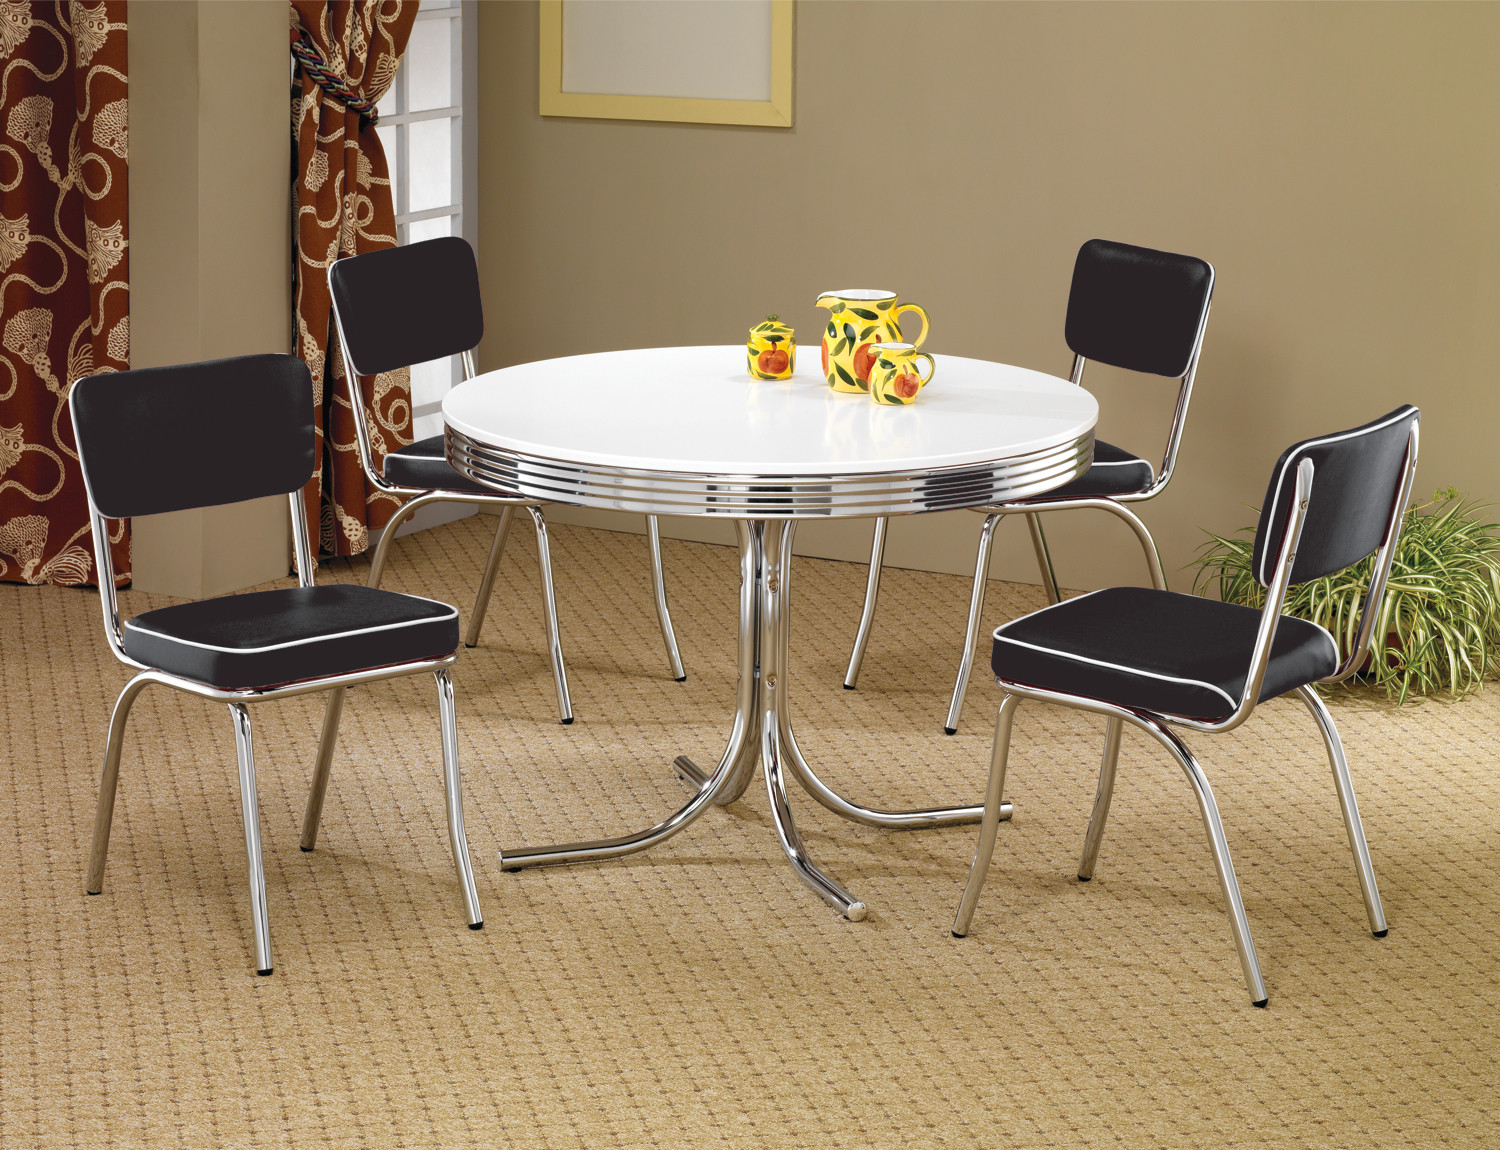  retro round kitchen table and 4 chairs